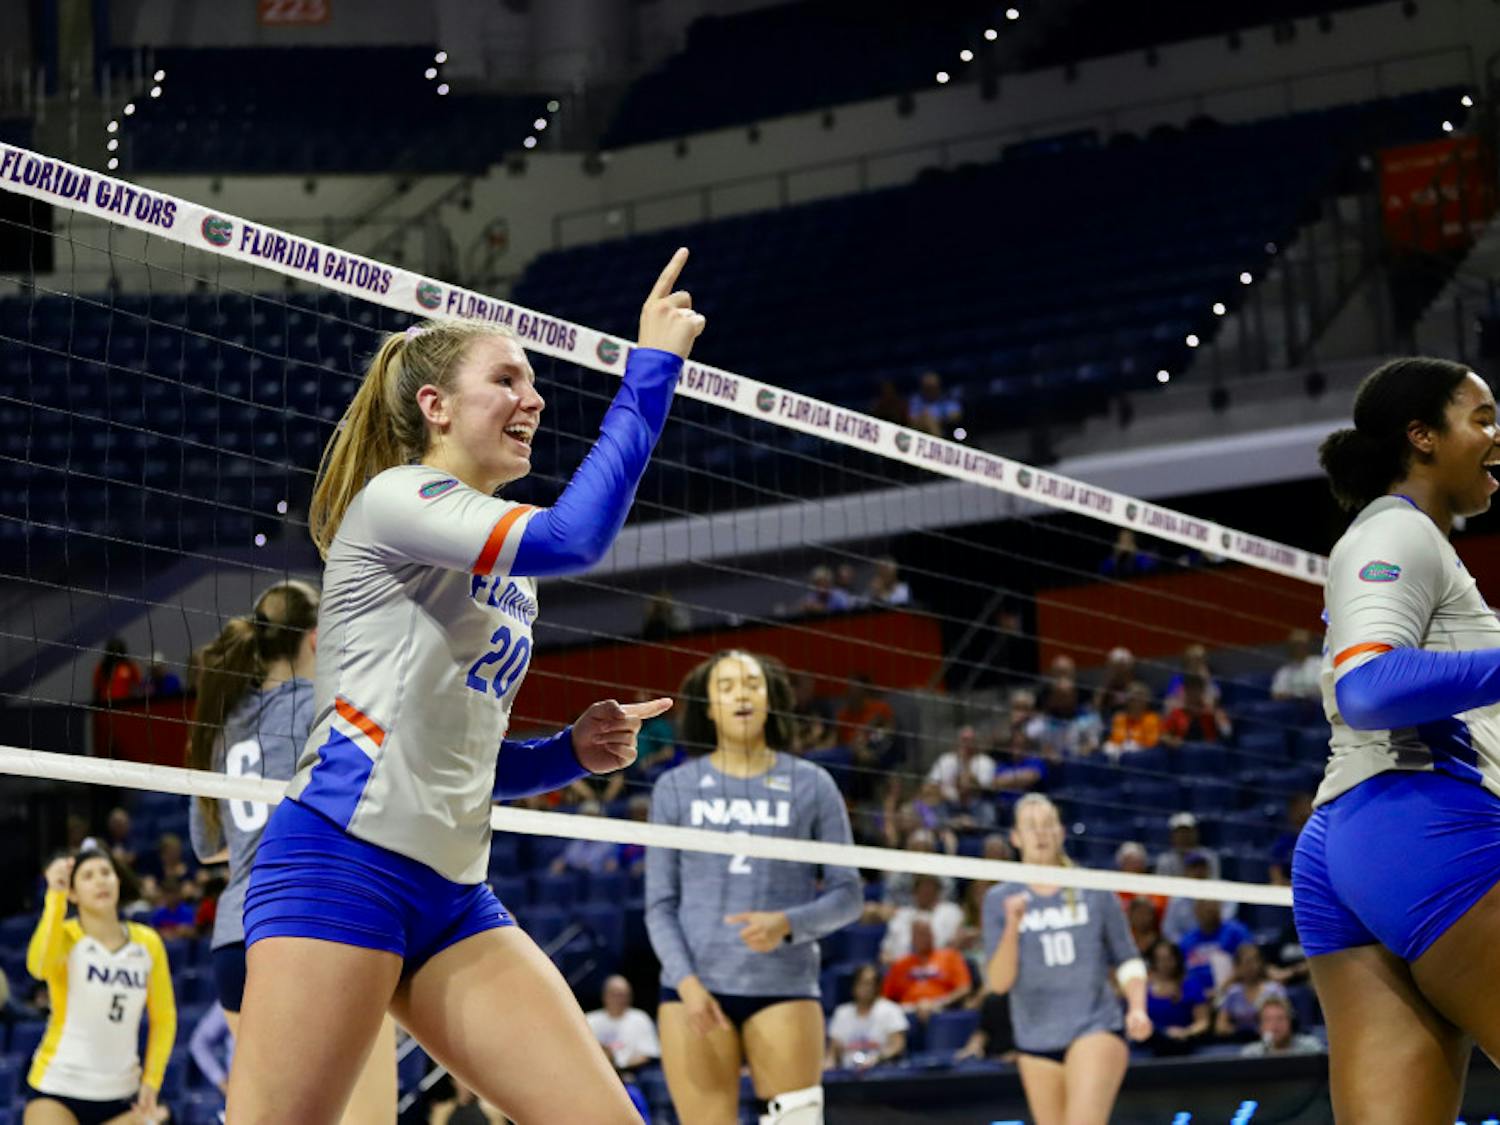 Sophomore outside hitter Thayer Hall was named the MVP of the Gators Invitational after notching a 33-kill weekend.